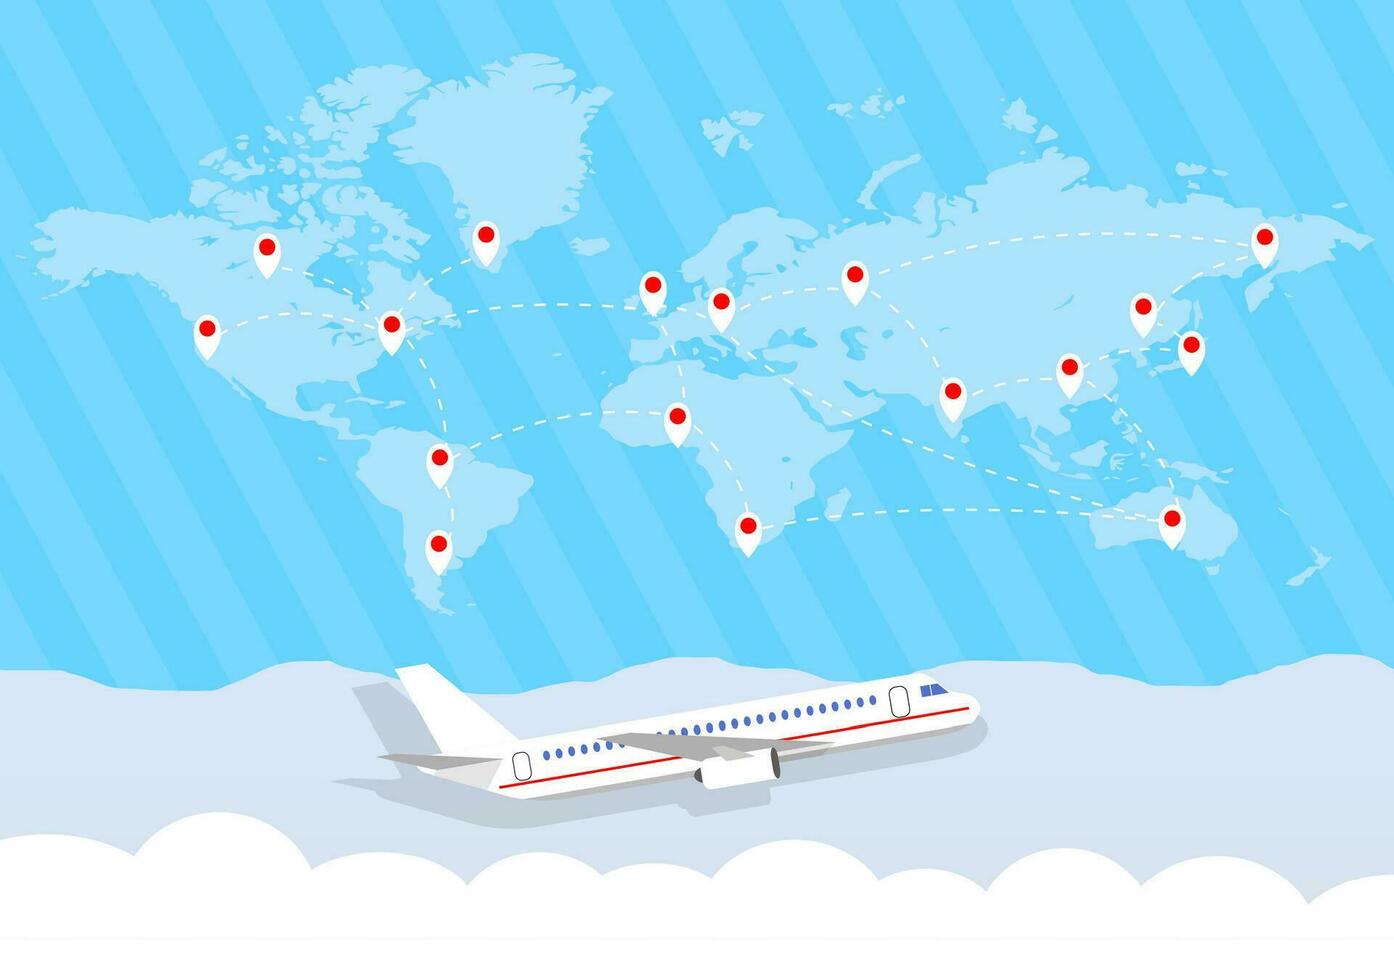 World map with routes and airplane in clouds. vector illustration in flat design. travel concept